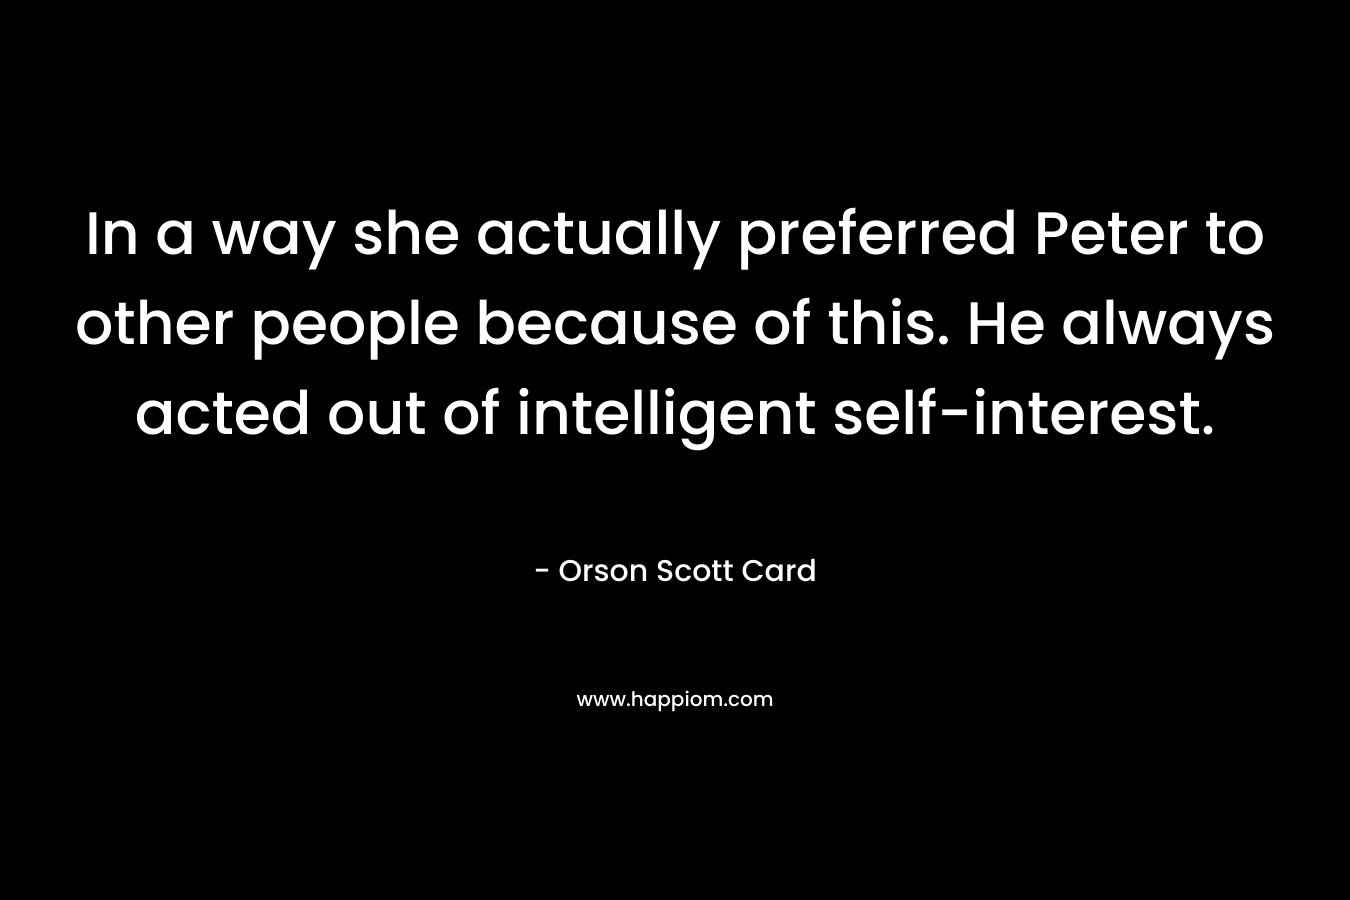 In a way she actually preferred Peter to other people because of this. He always acted out of intelligent self-interest.